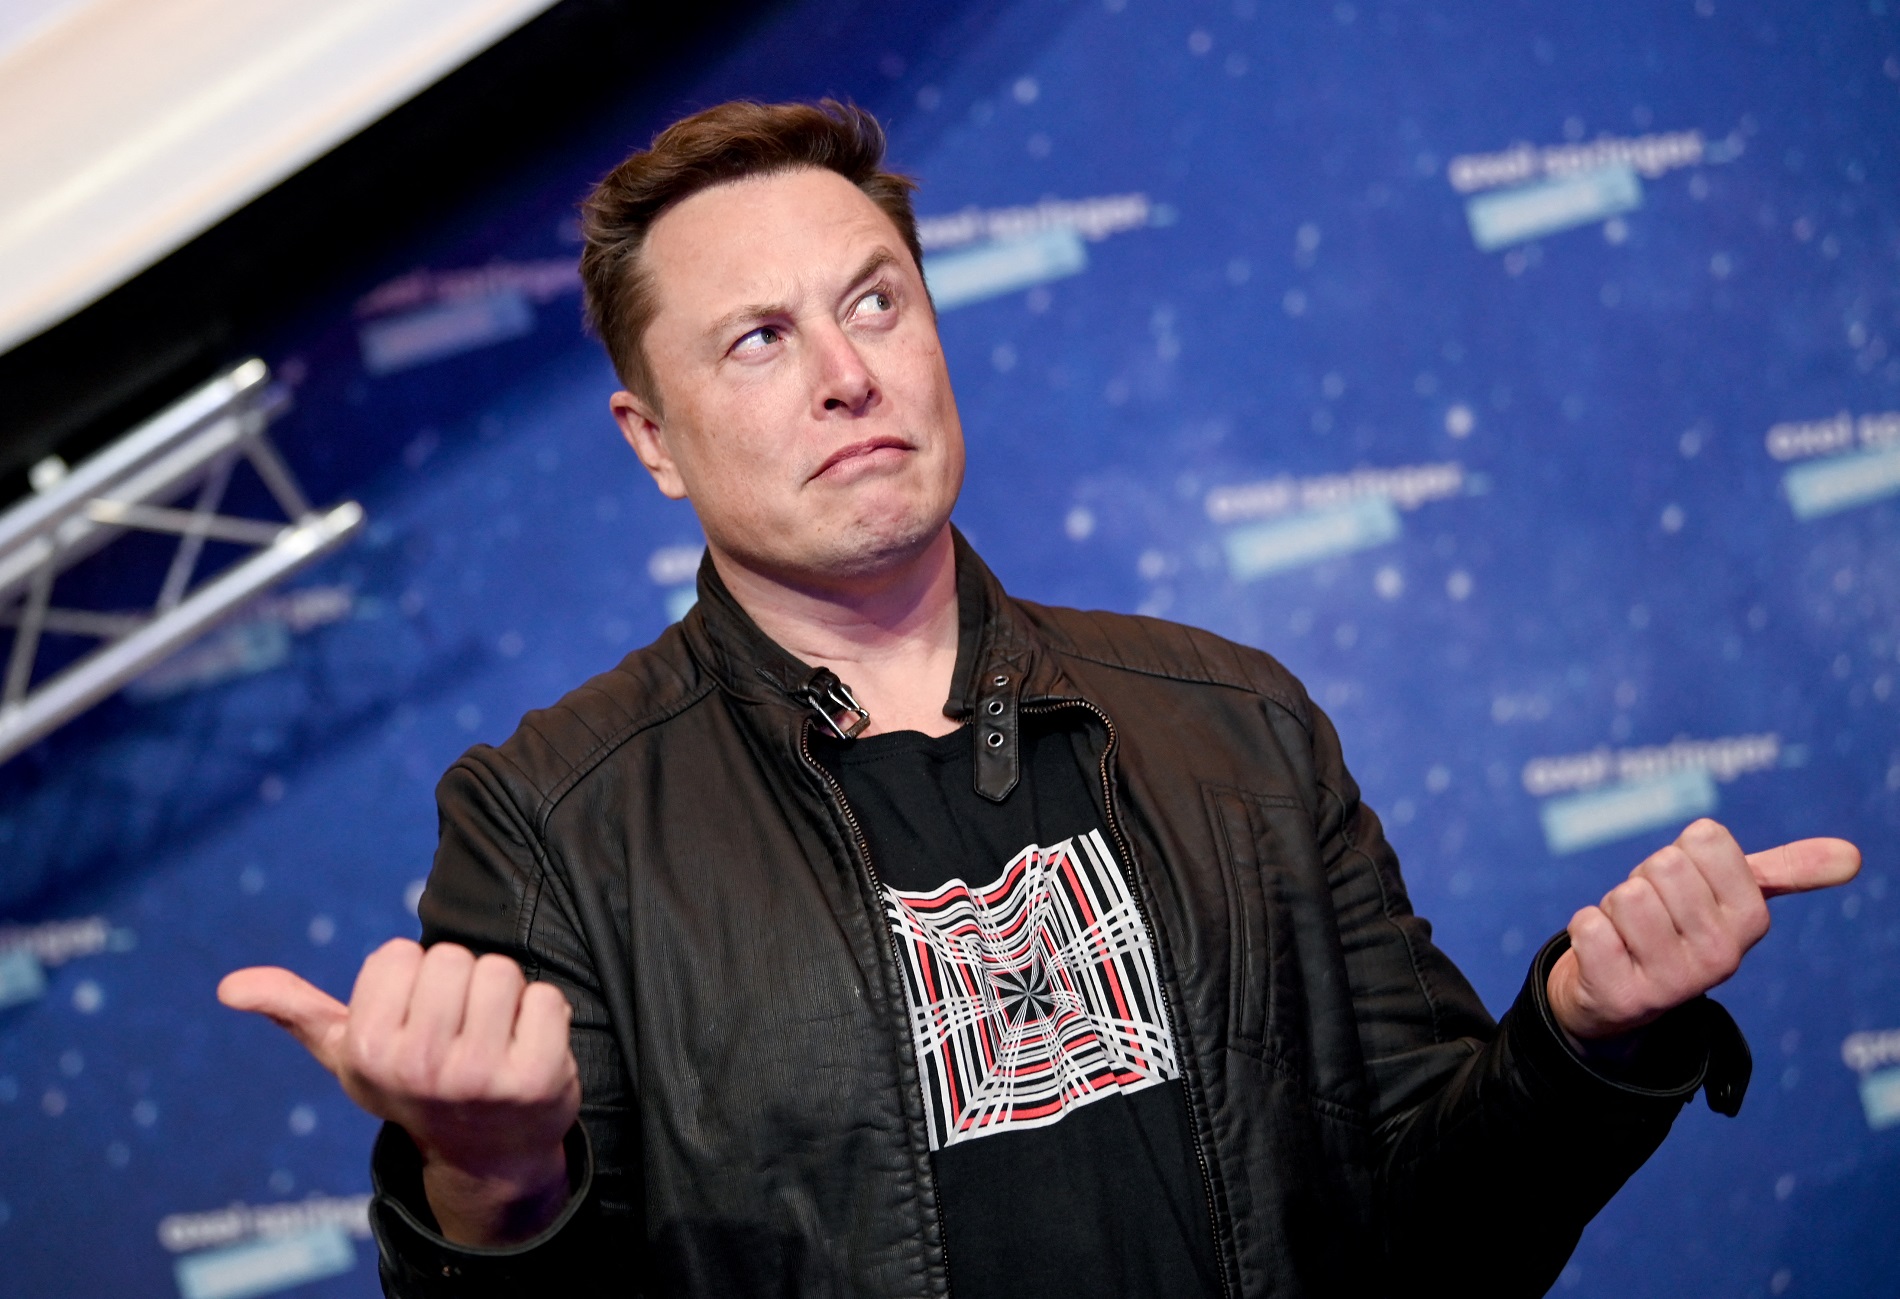 Spoil brat Elon Musk doesn't care about SA as he plays with new Twitter toy